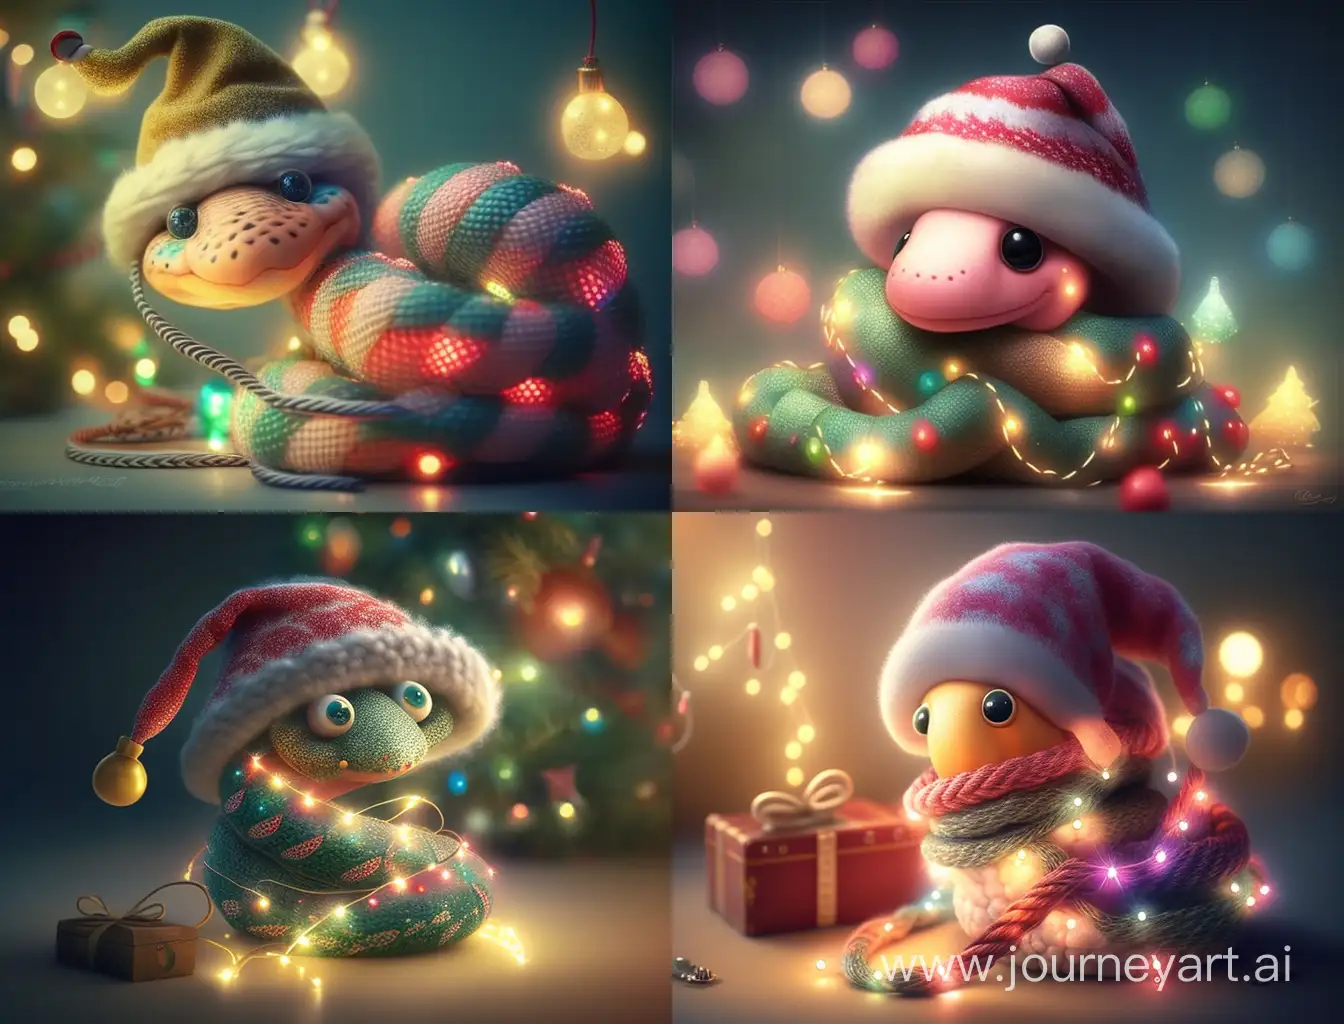 A kind, sweet, funny little Pixar-style Snake in a Santa Claus hat. It wraps around a Christmas tree decorated with Christmas balls and garlands, colorful lights. There are a lot of presents under the tree. The picture is in light, pastel, delicate colors